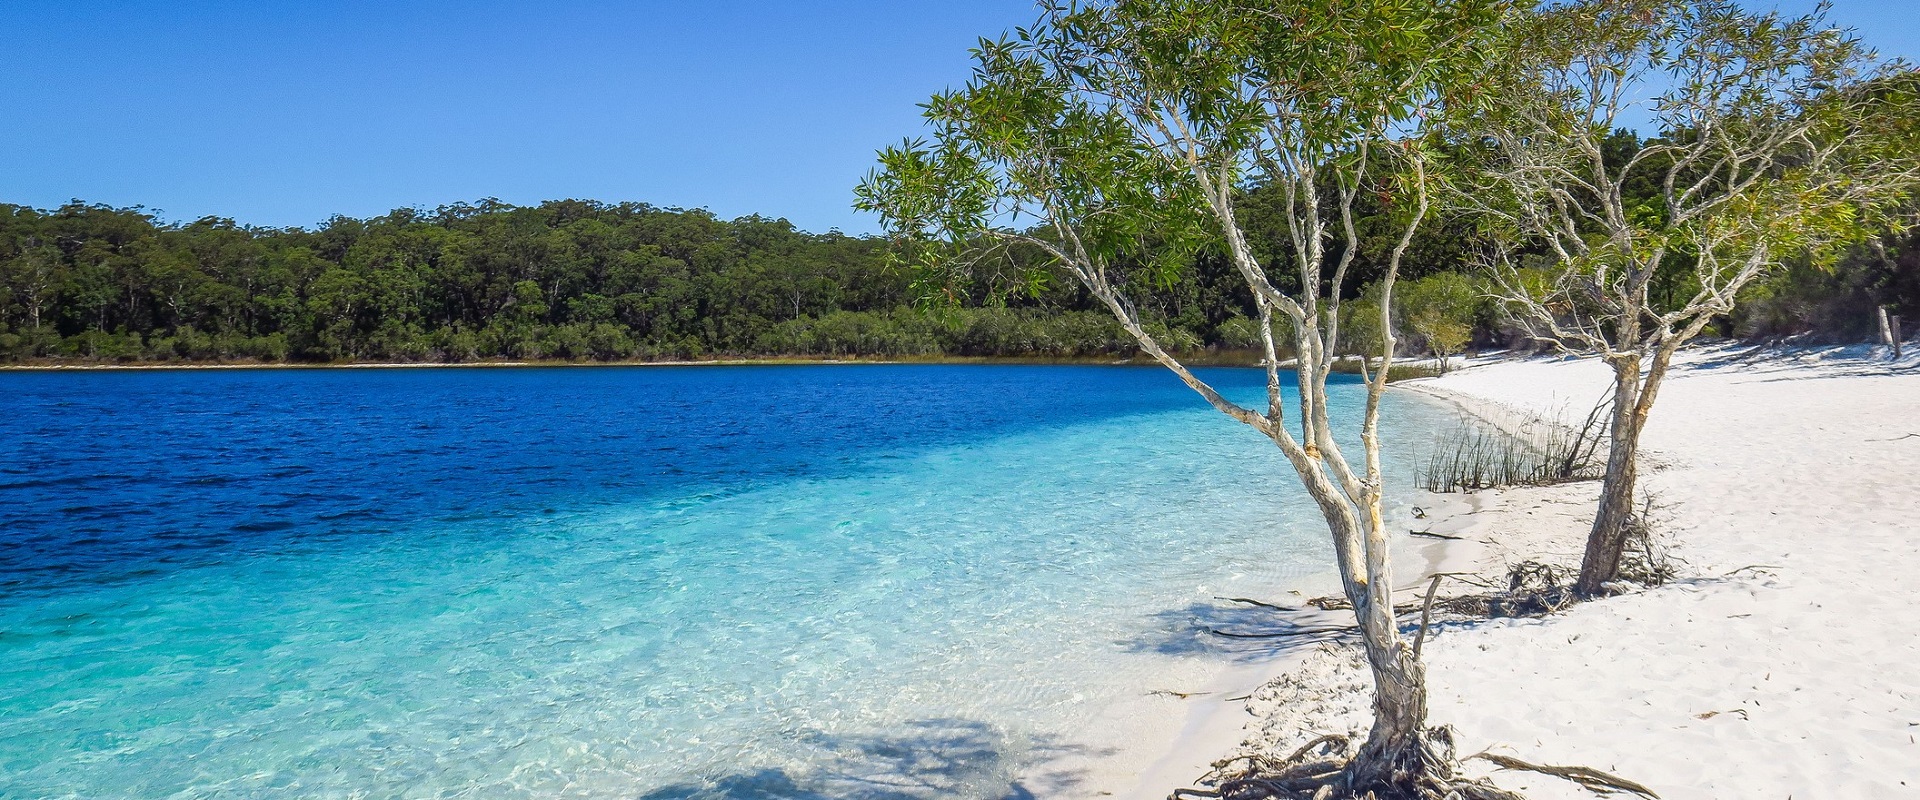 The clear blue waters of Fraser Island. Image: Getty